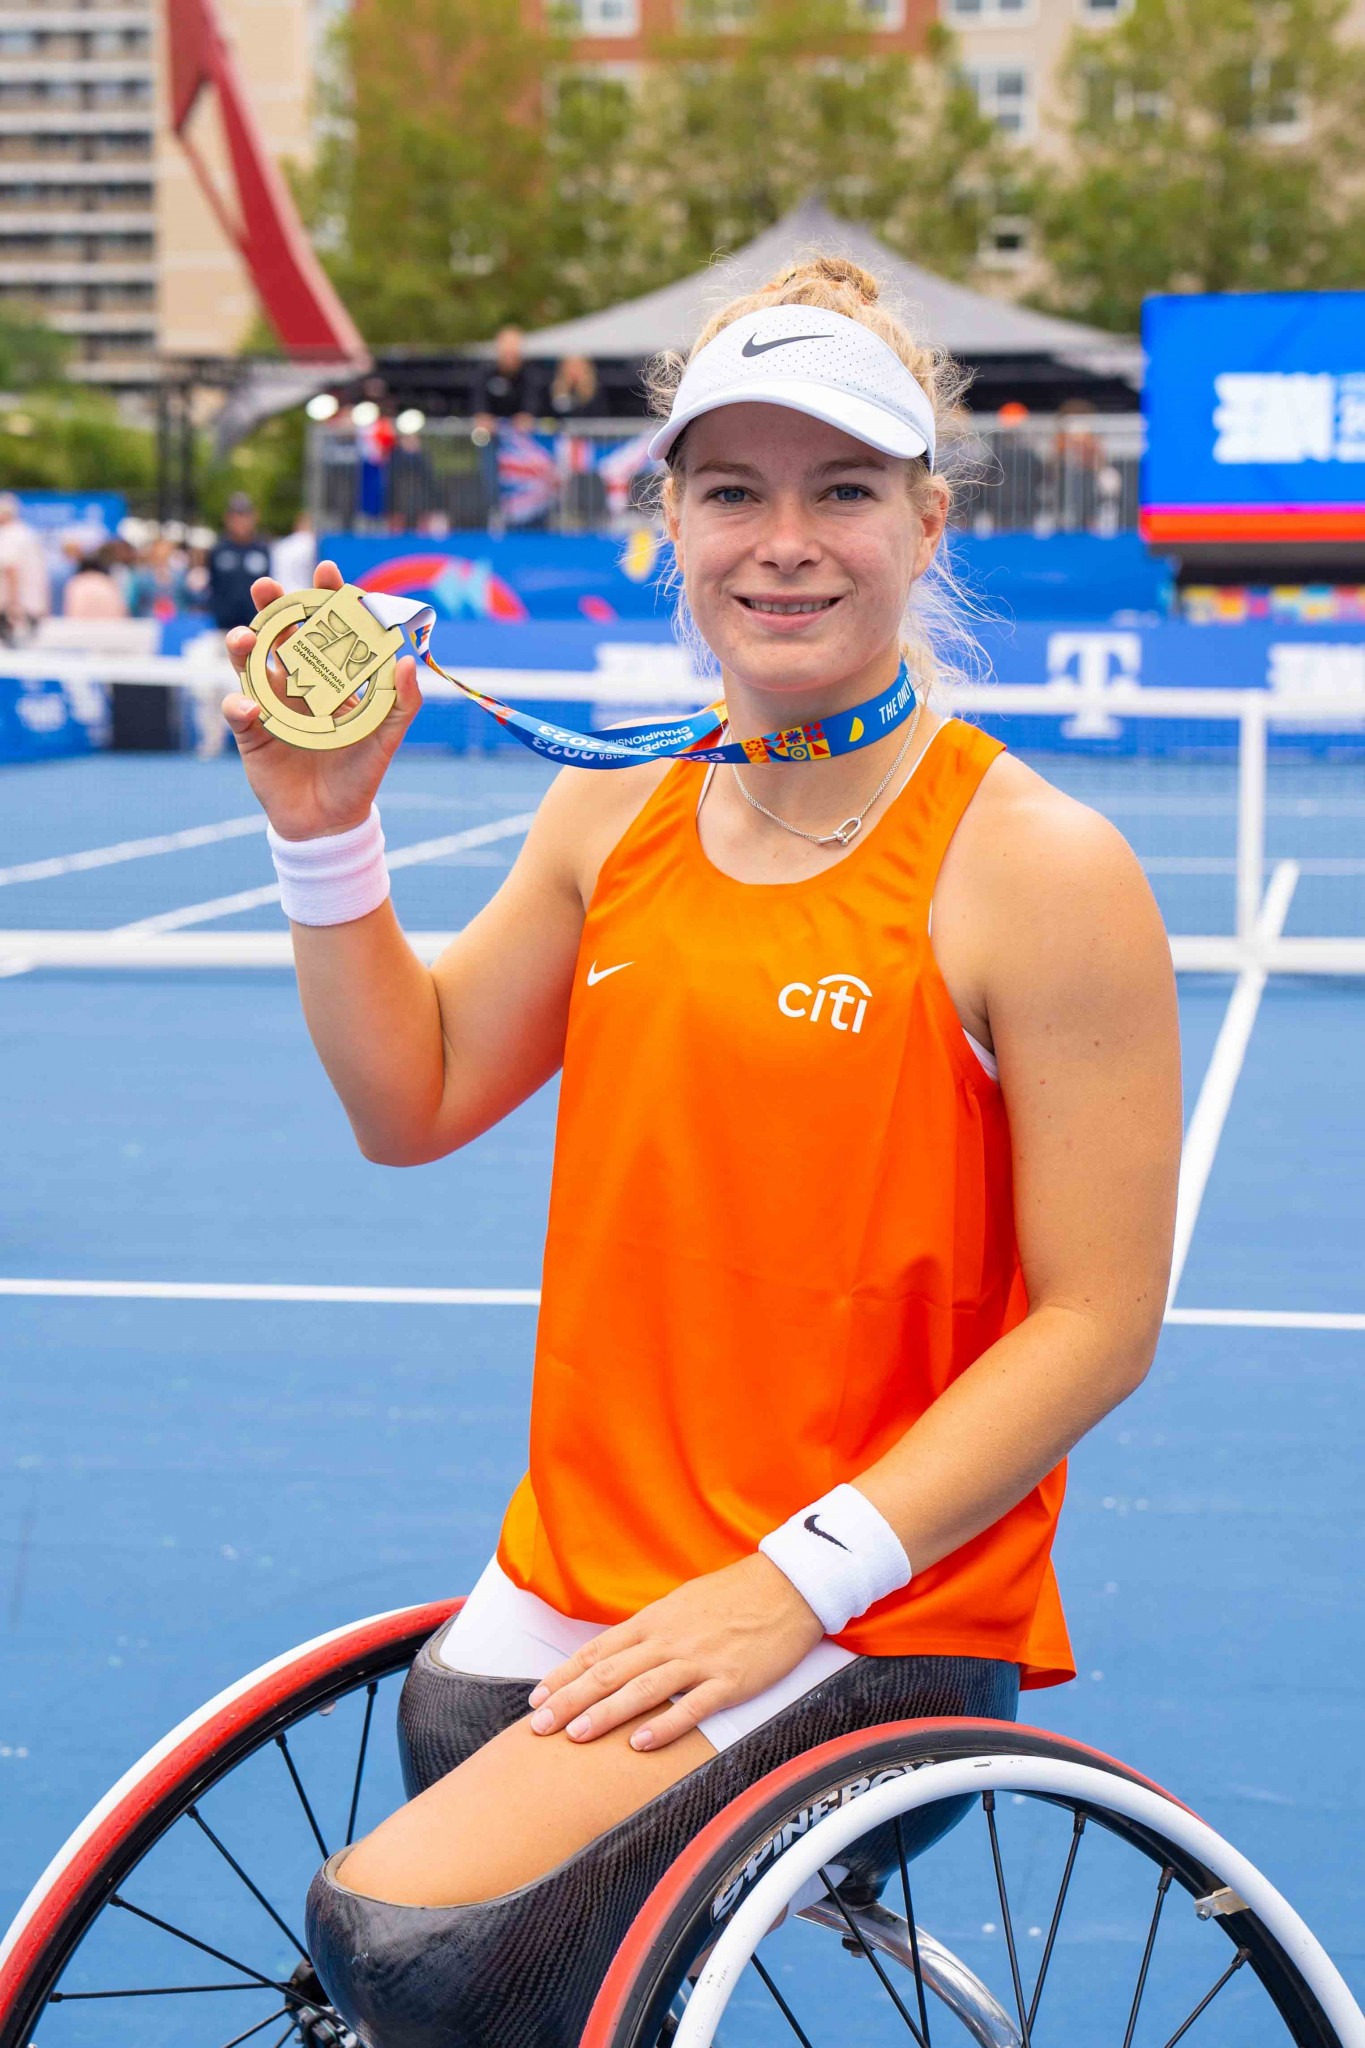 The women's singles and doubles titles were won by Diede de Groot on a golden day for The Netherlands ©EPC